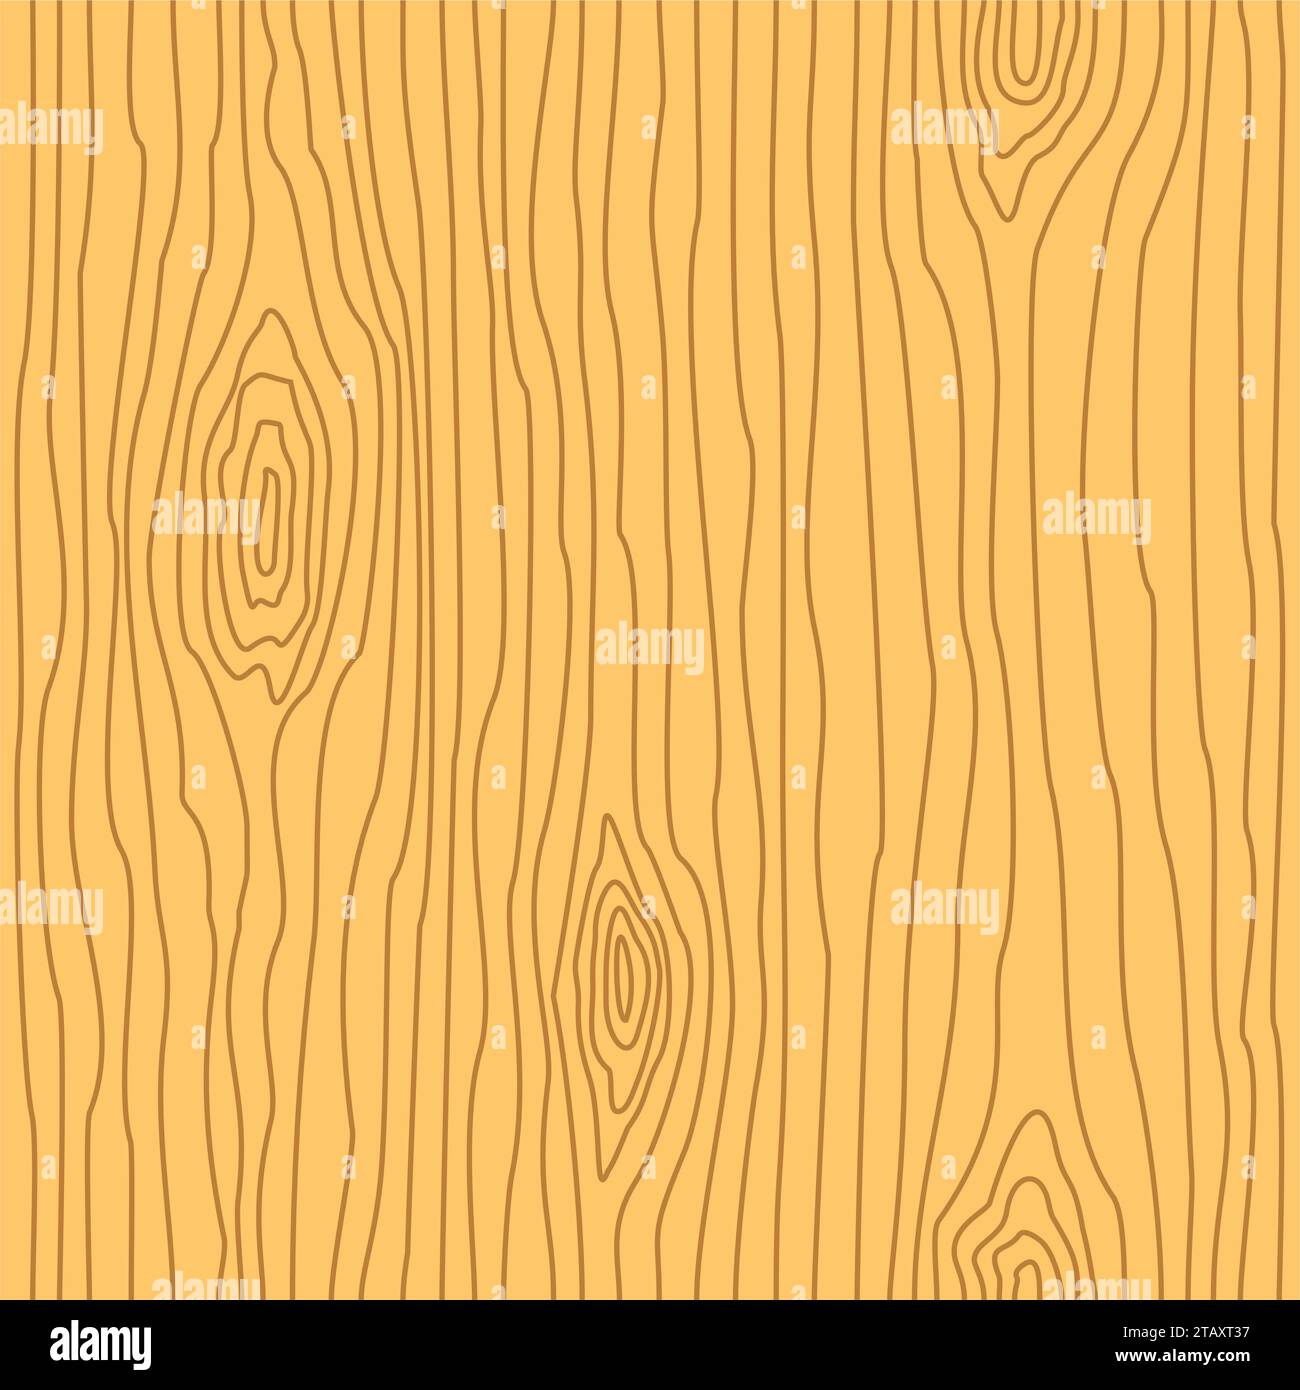 Wood grain texture. Seamless wooden pattern. Abstract line background ...